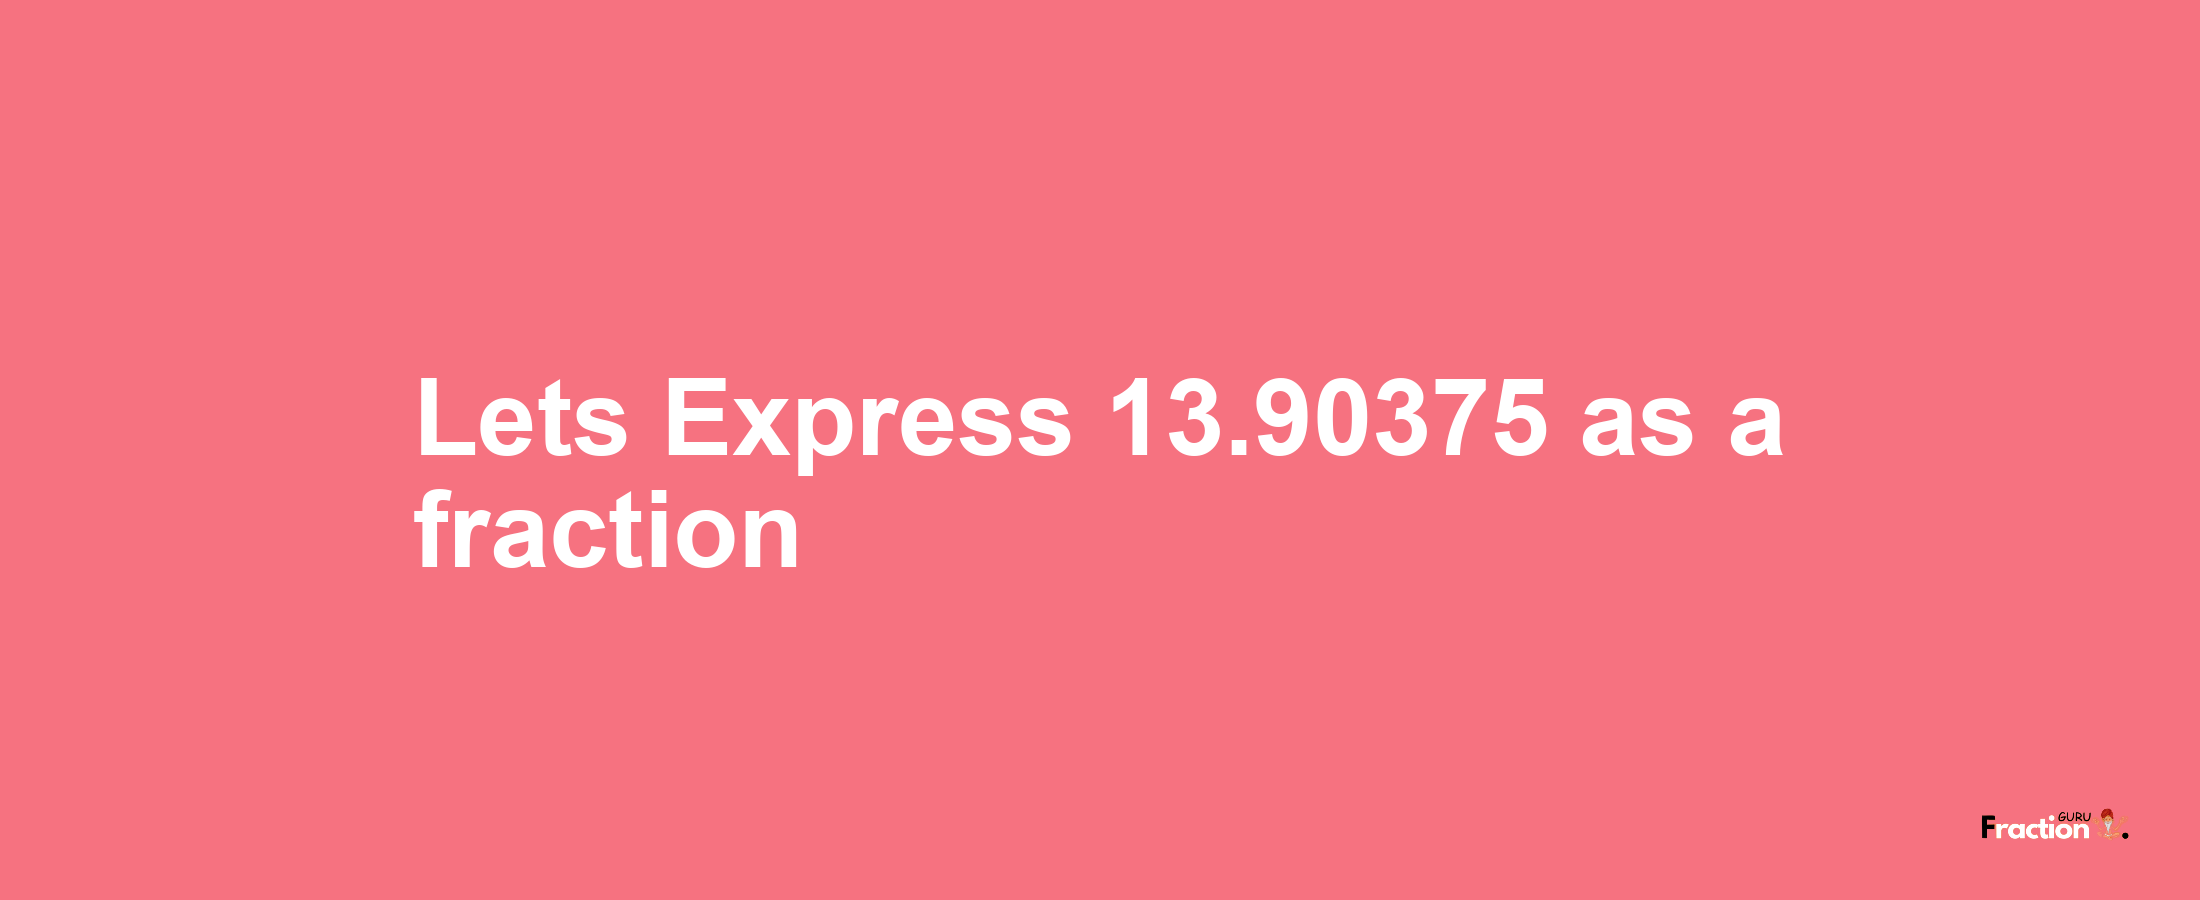 Lets Express 13.90375 as afraction